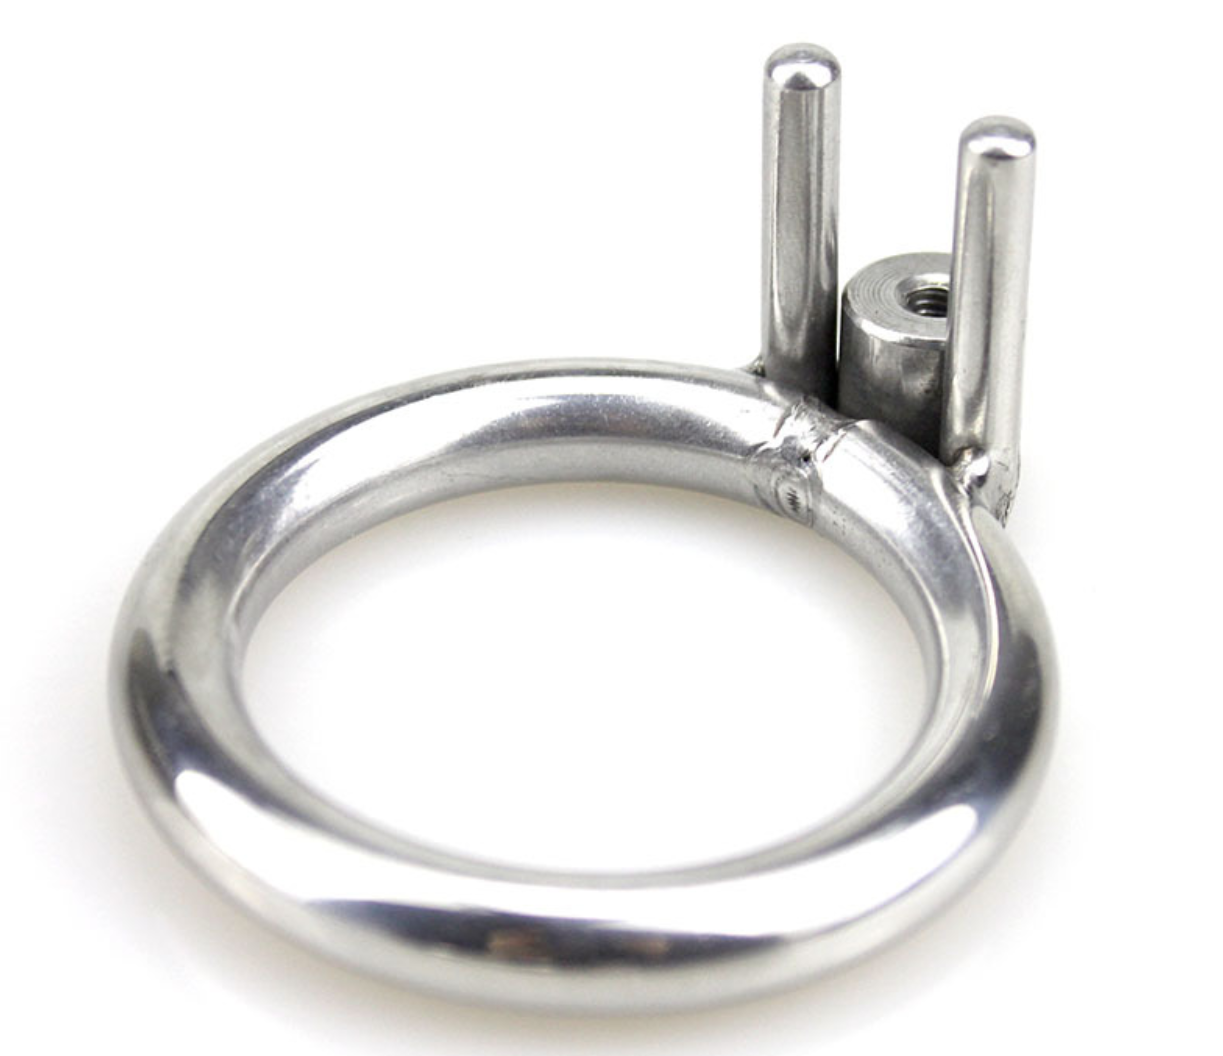 Tiny Metal Chastity Device 0.62 Inches Long – CHASTITY CAGE CO